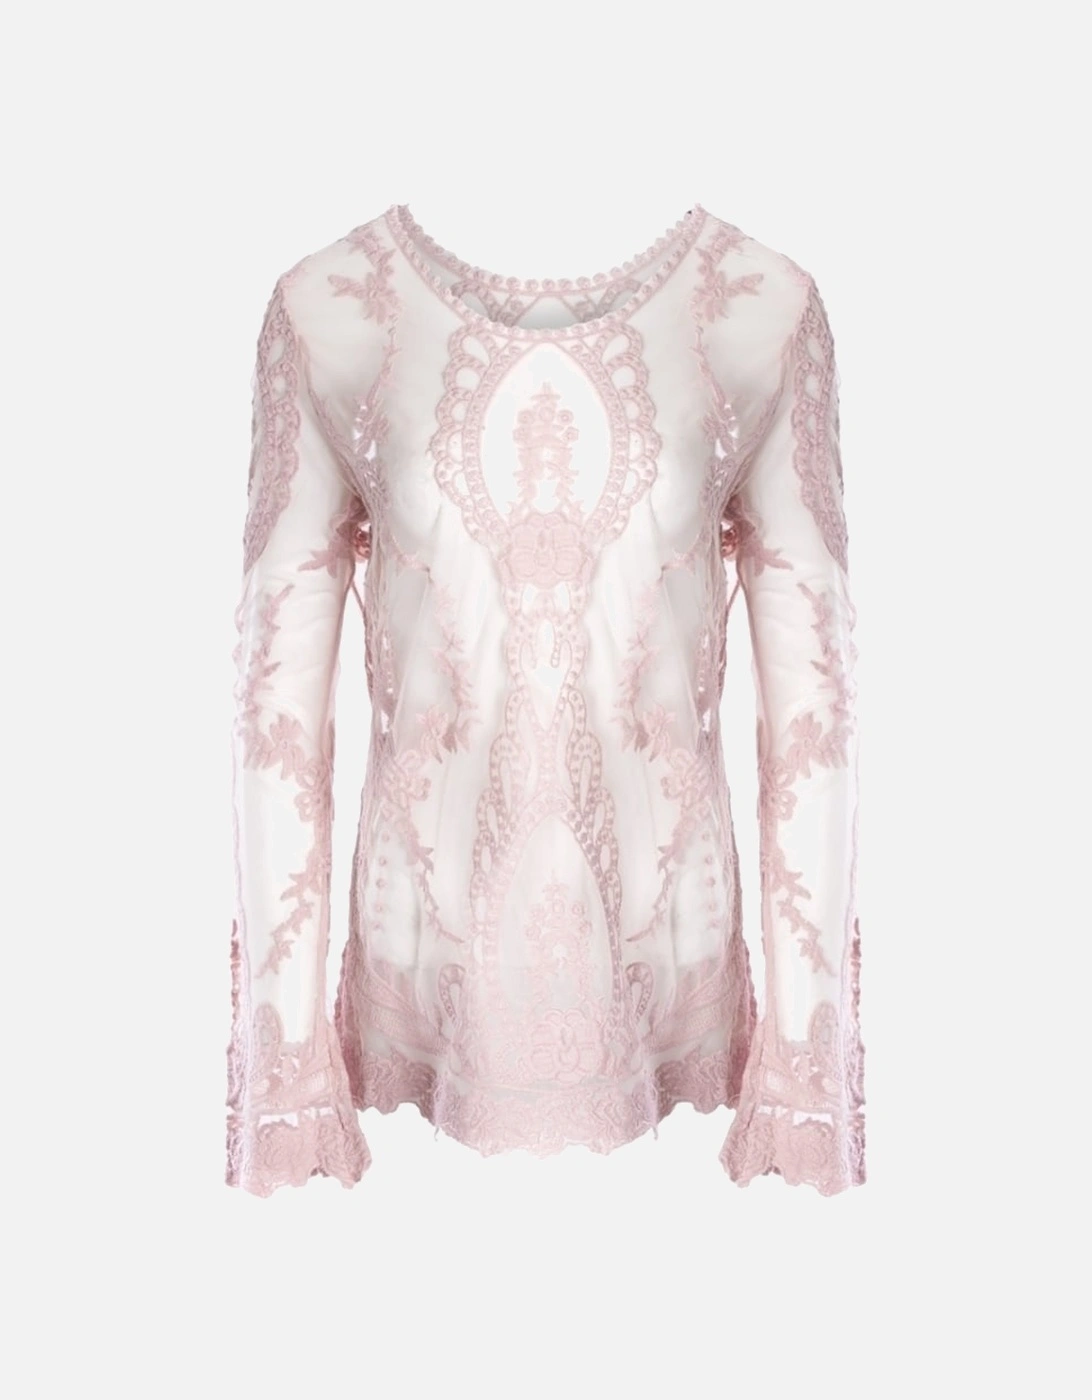 Pink Vintage Inspired Lace Long Sleeved Top